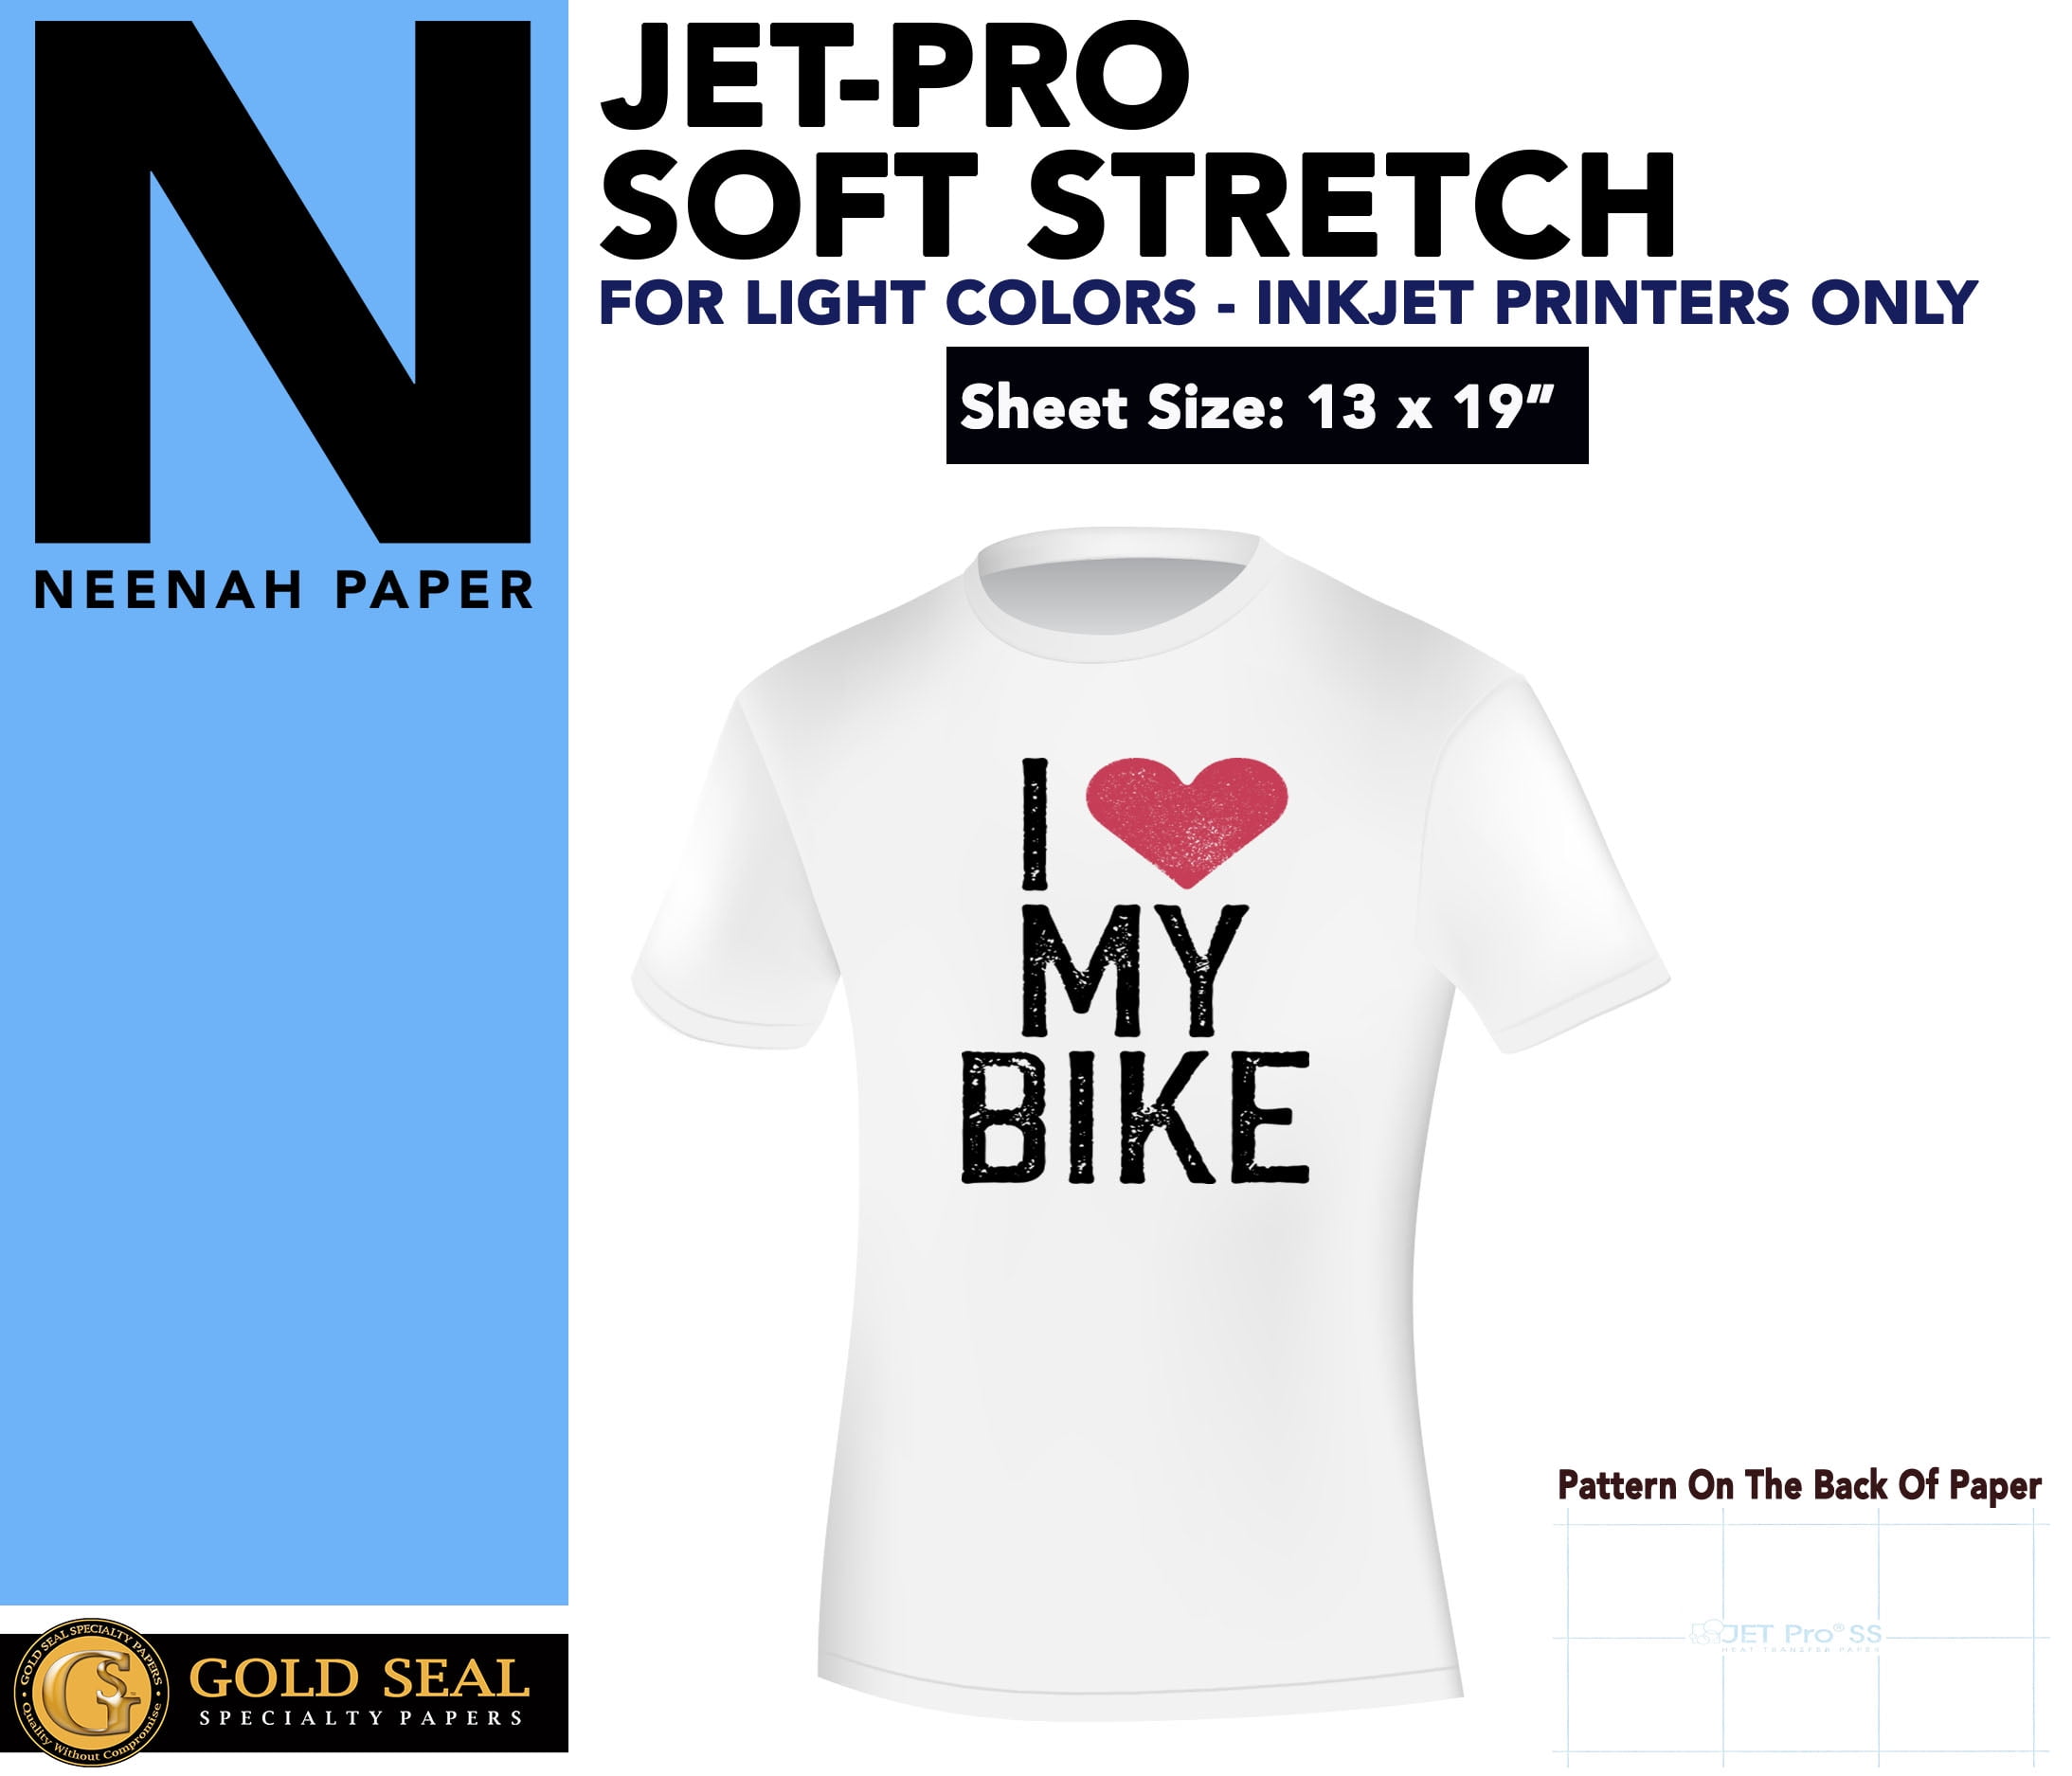 10 Sheet Pack 13 x 19 Neenah JET-PRO SofStretch Heat Transfer Papers 